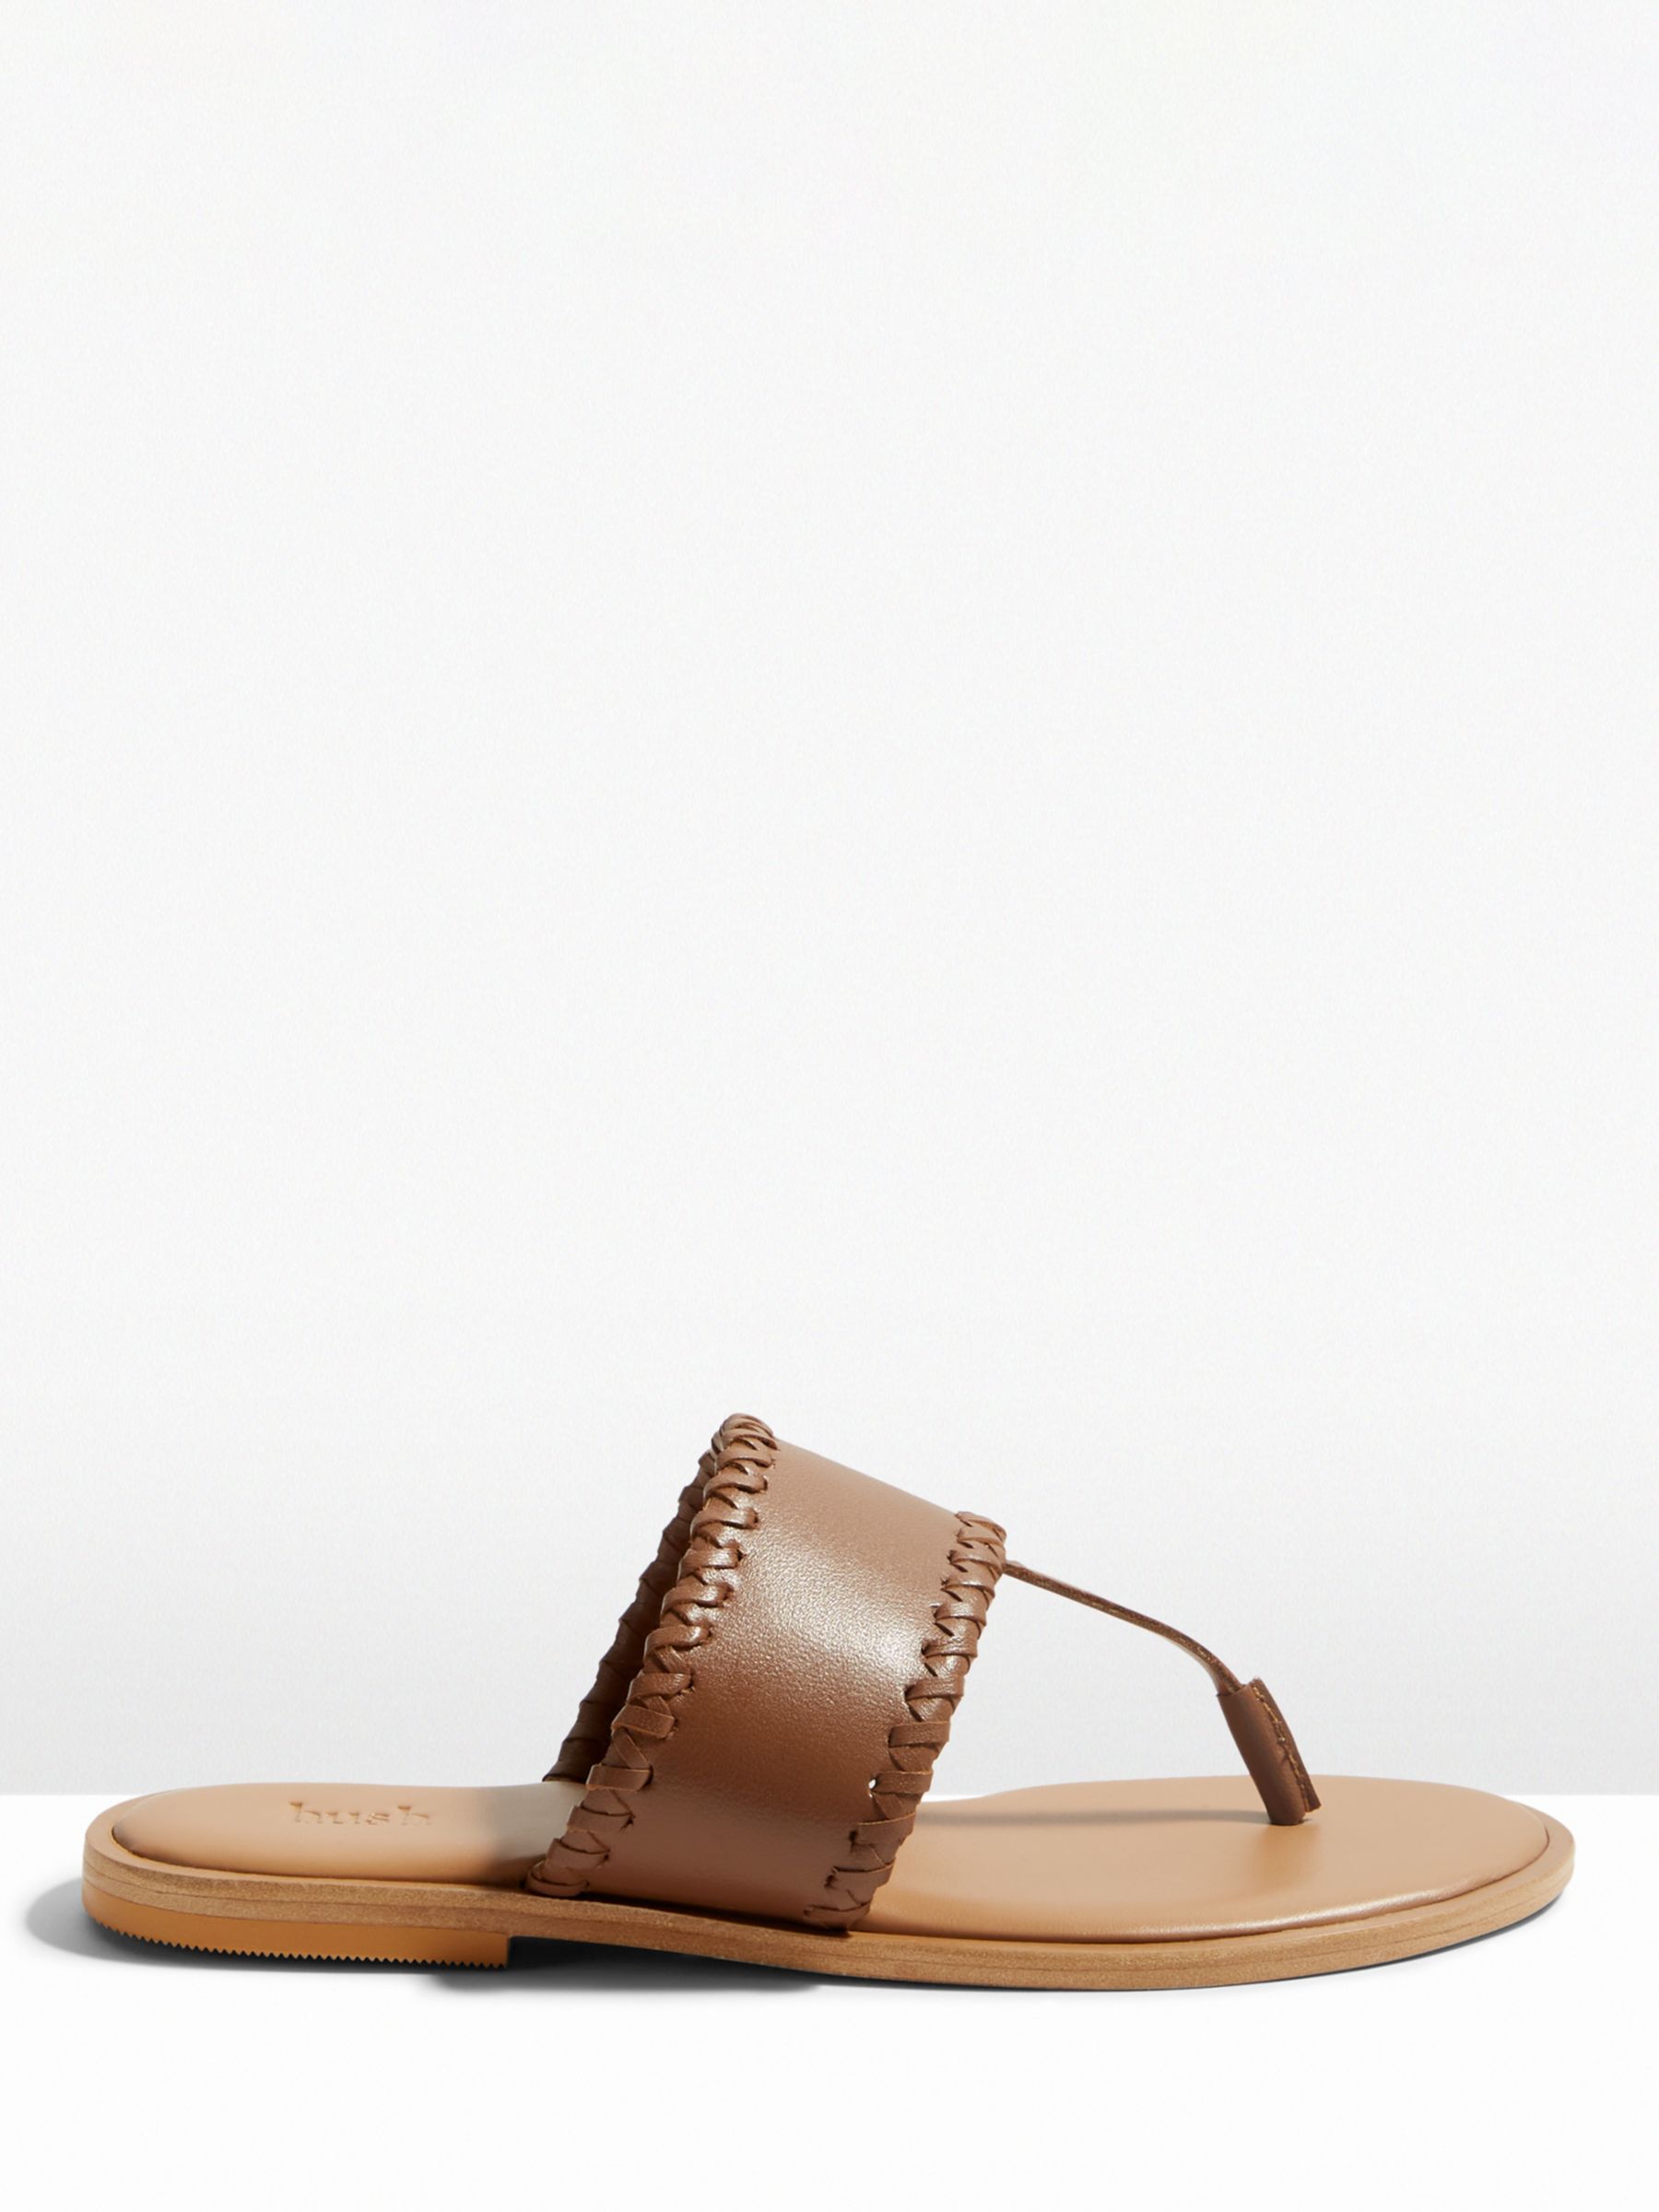 HUSH Wilma Leather Whipstitch Sandals at John Lewis & Partners